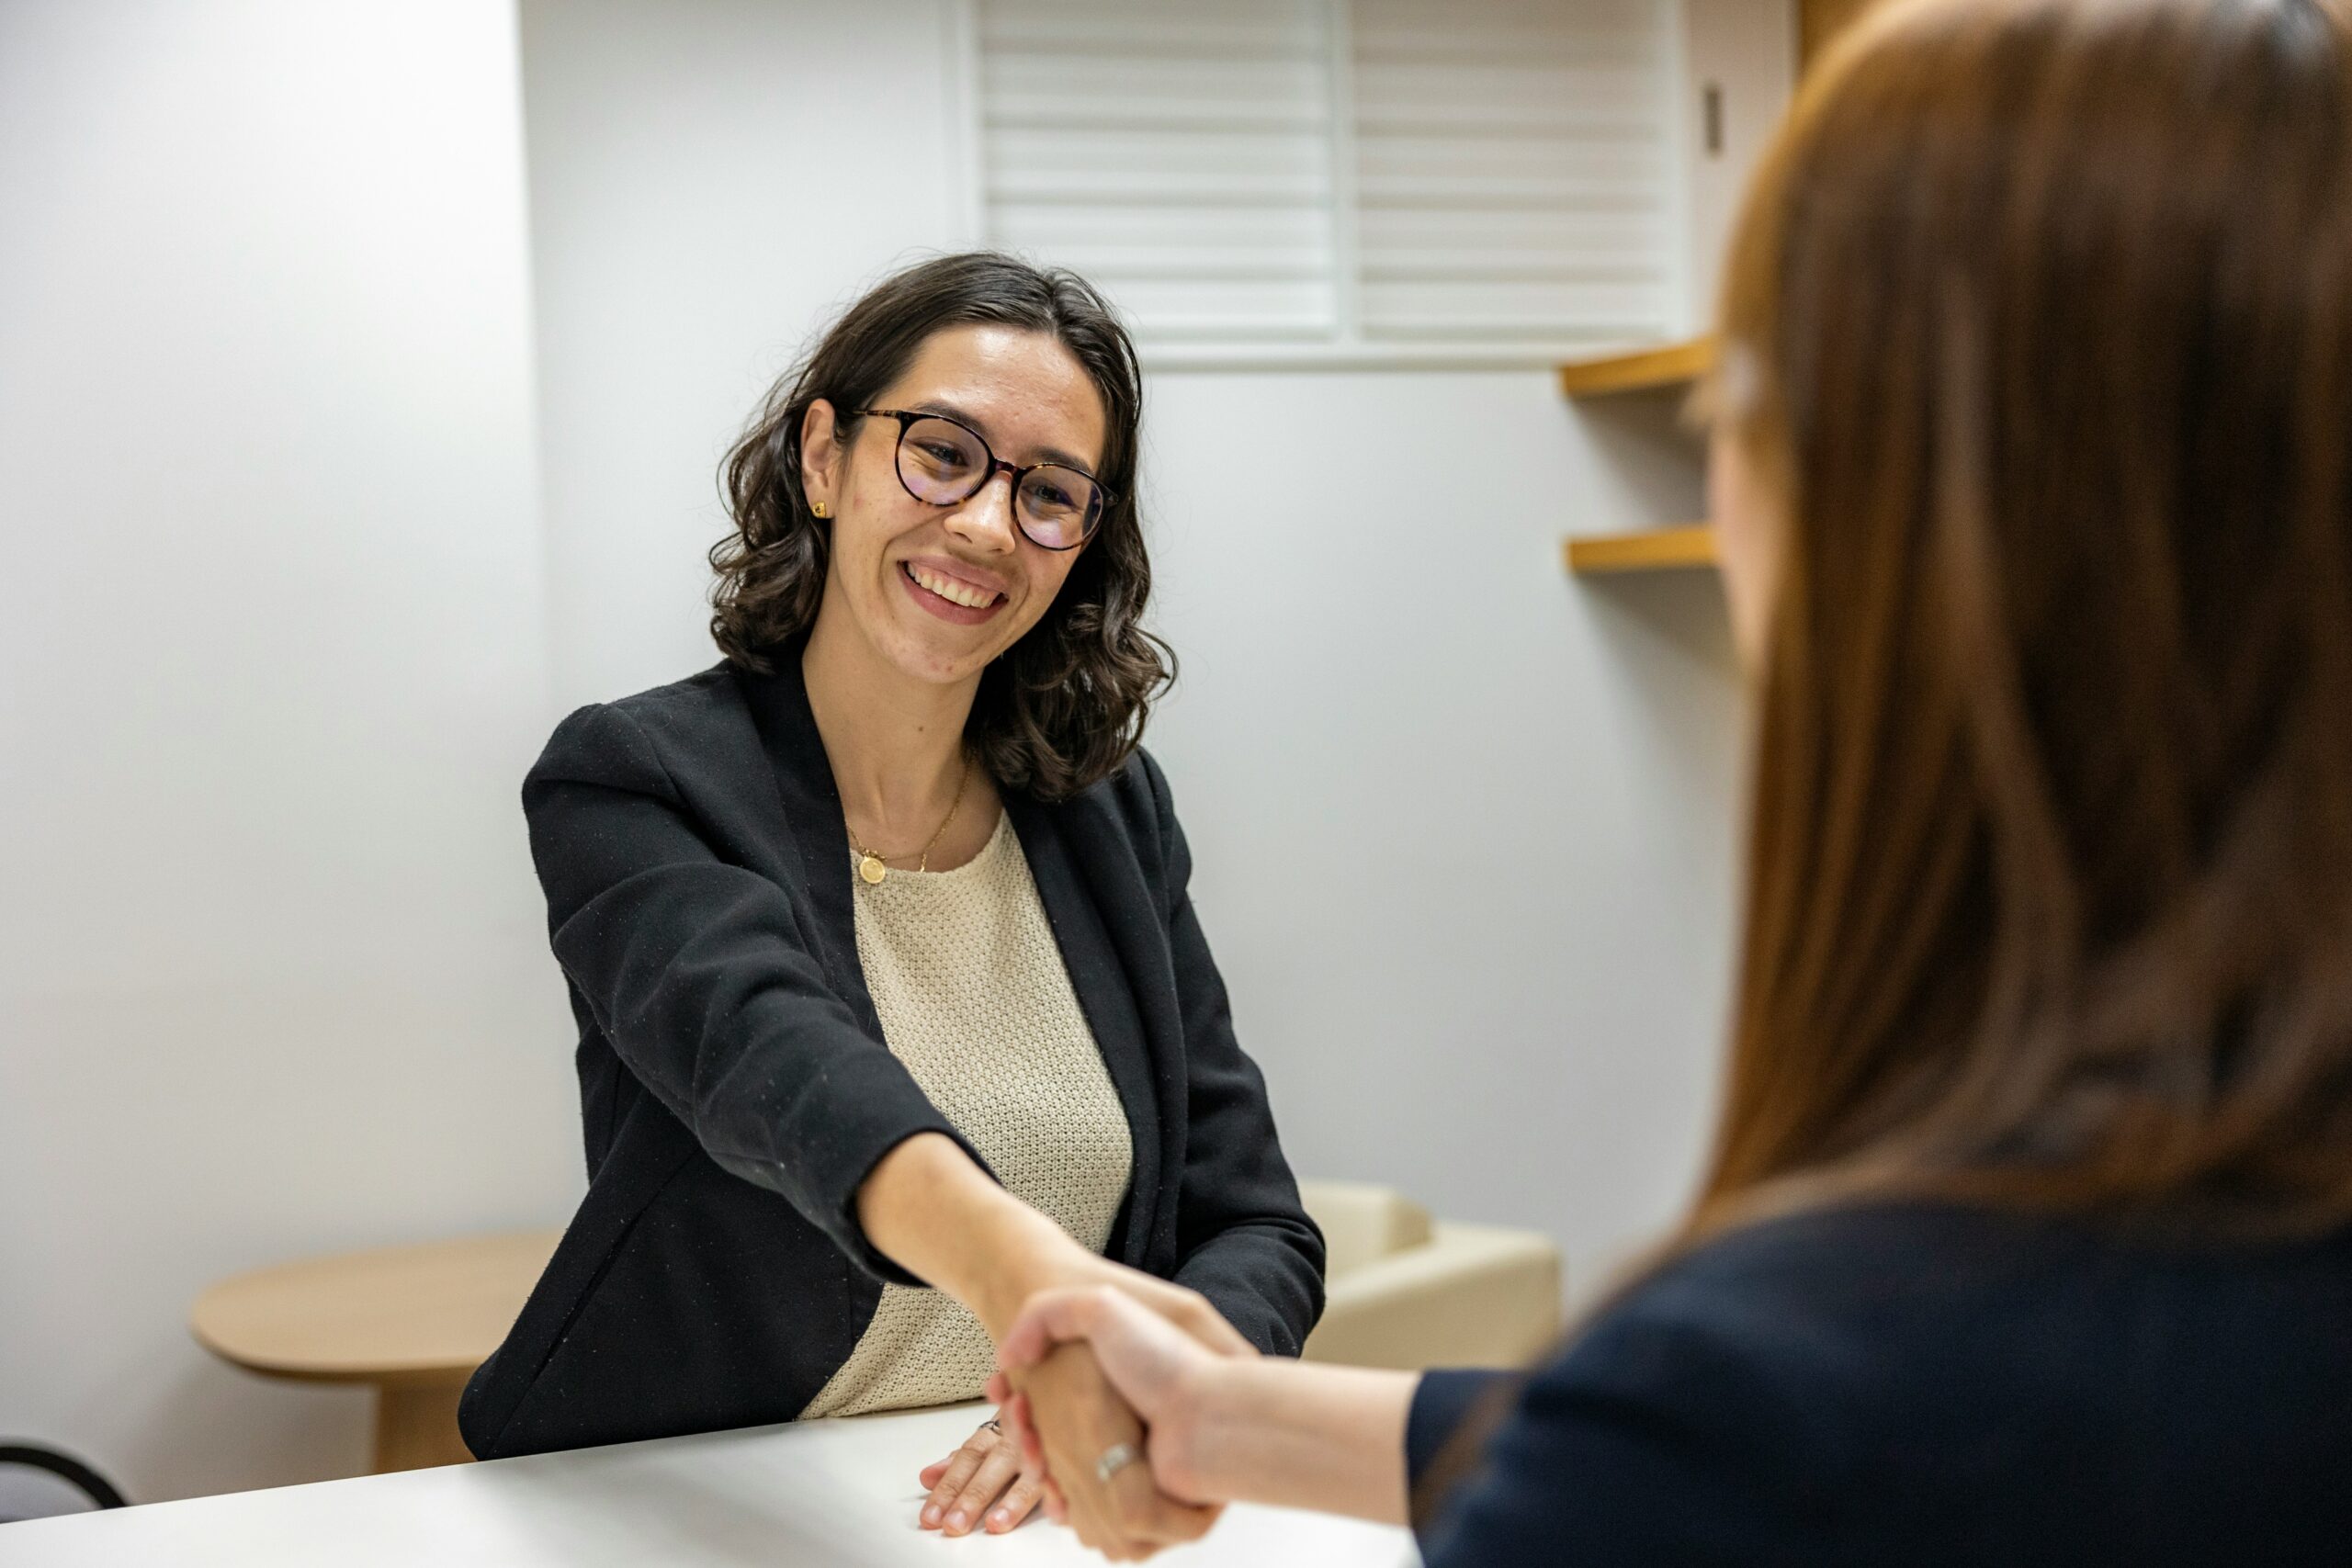 Woman shaking hands at job interview